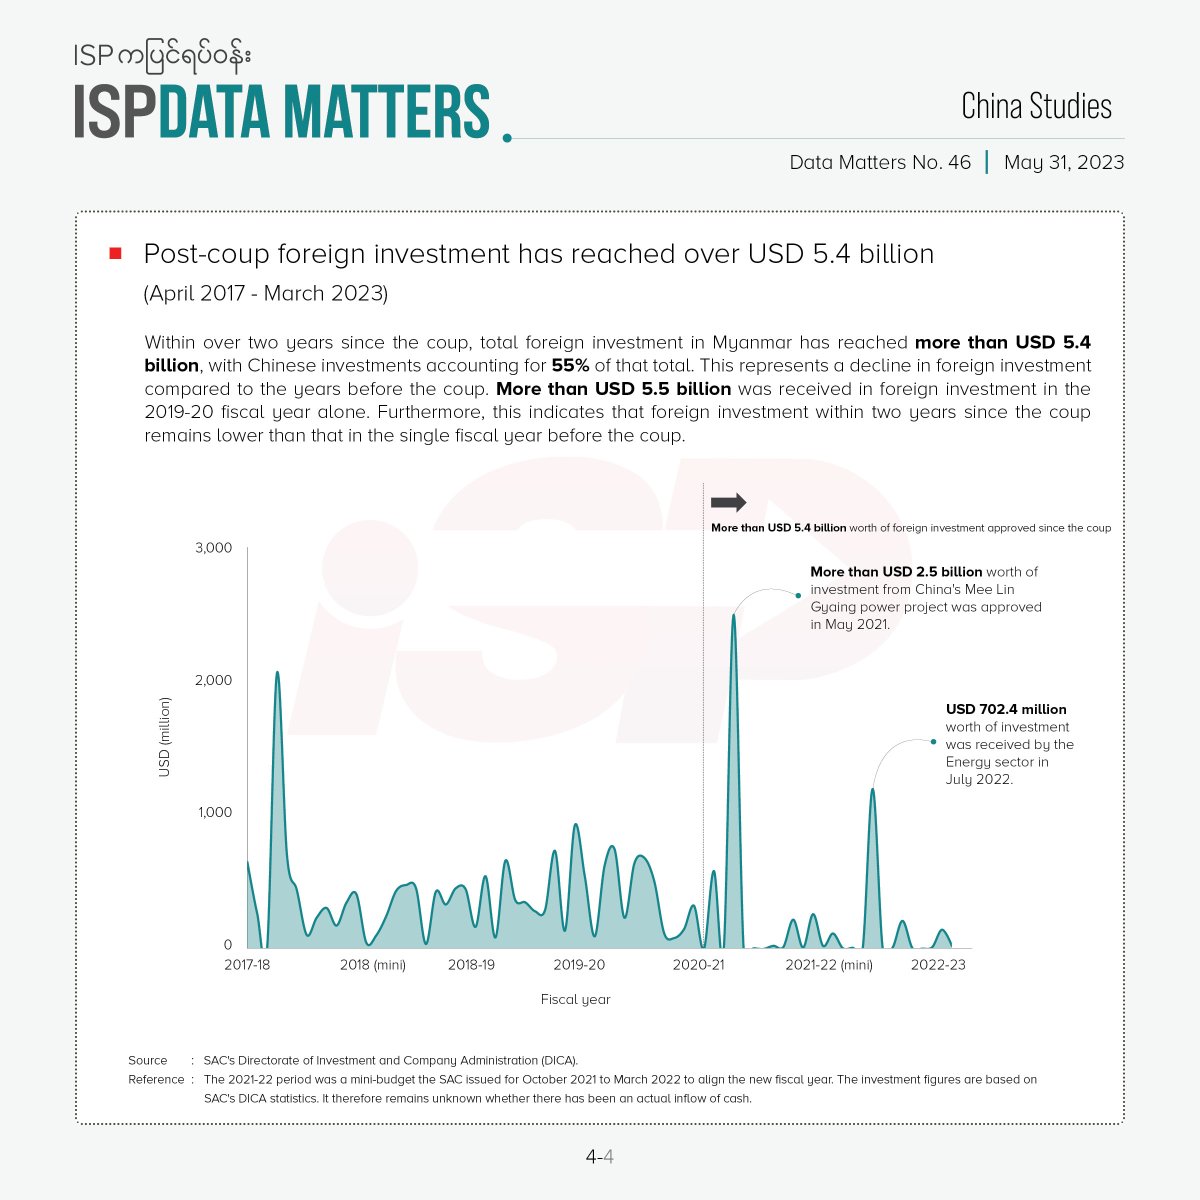 ISP Data Matters No. 46 

FDI in post-coup Myanmar witnesses a decline. Two-year total falls short of pre-coup one-year value. 

Download full: ispmyanmar.com/community/wp-c…

#ISPDataMatters
#ChinaStudies